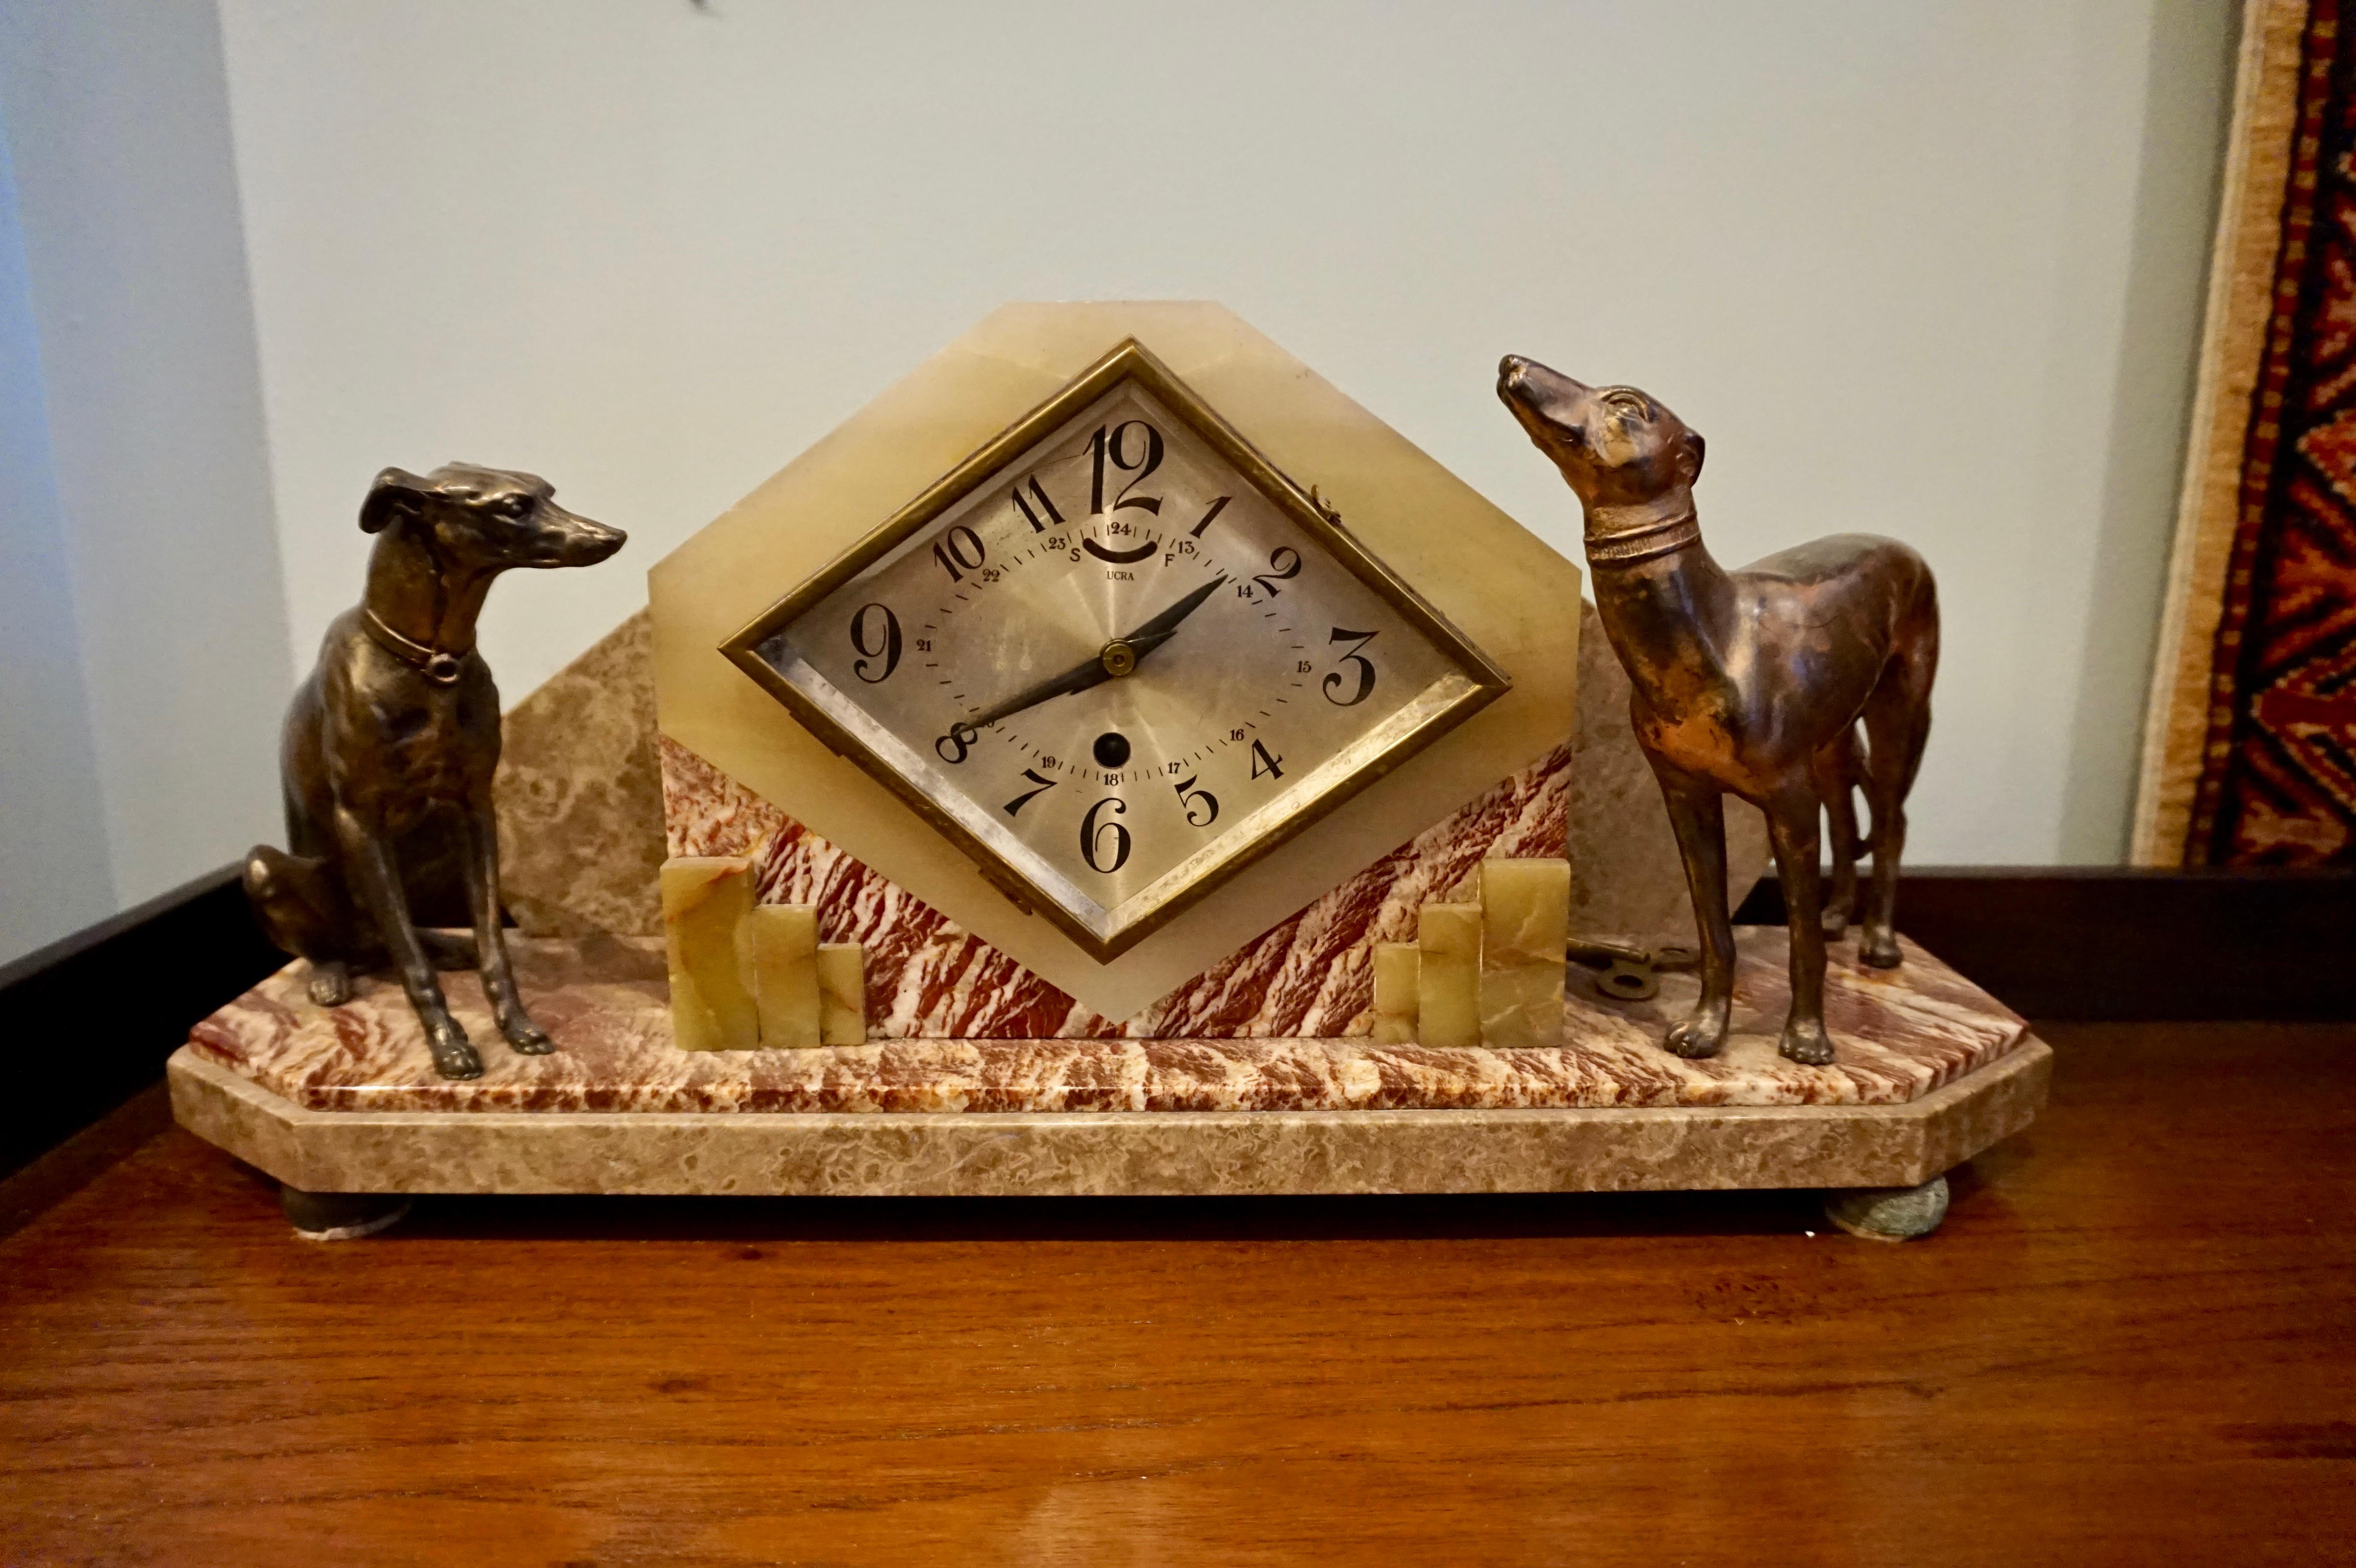 Circa 1935

Rare Art Deco mantel clock exquisitely made with marble and onyx with surreal dog figurines in contrasting poses. Original patination. Statement piece.